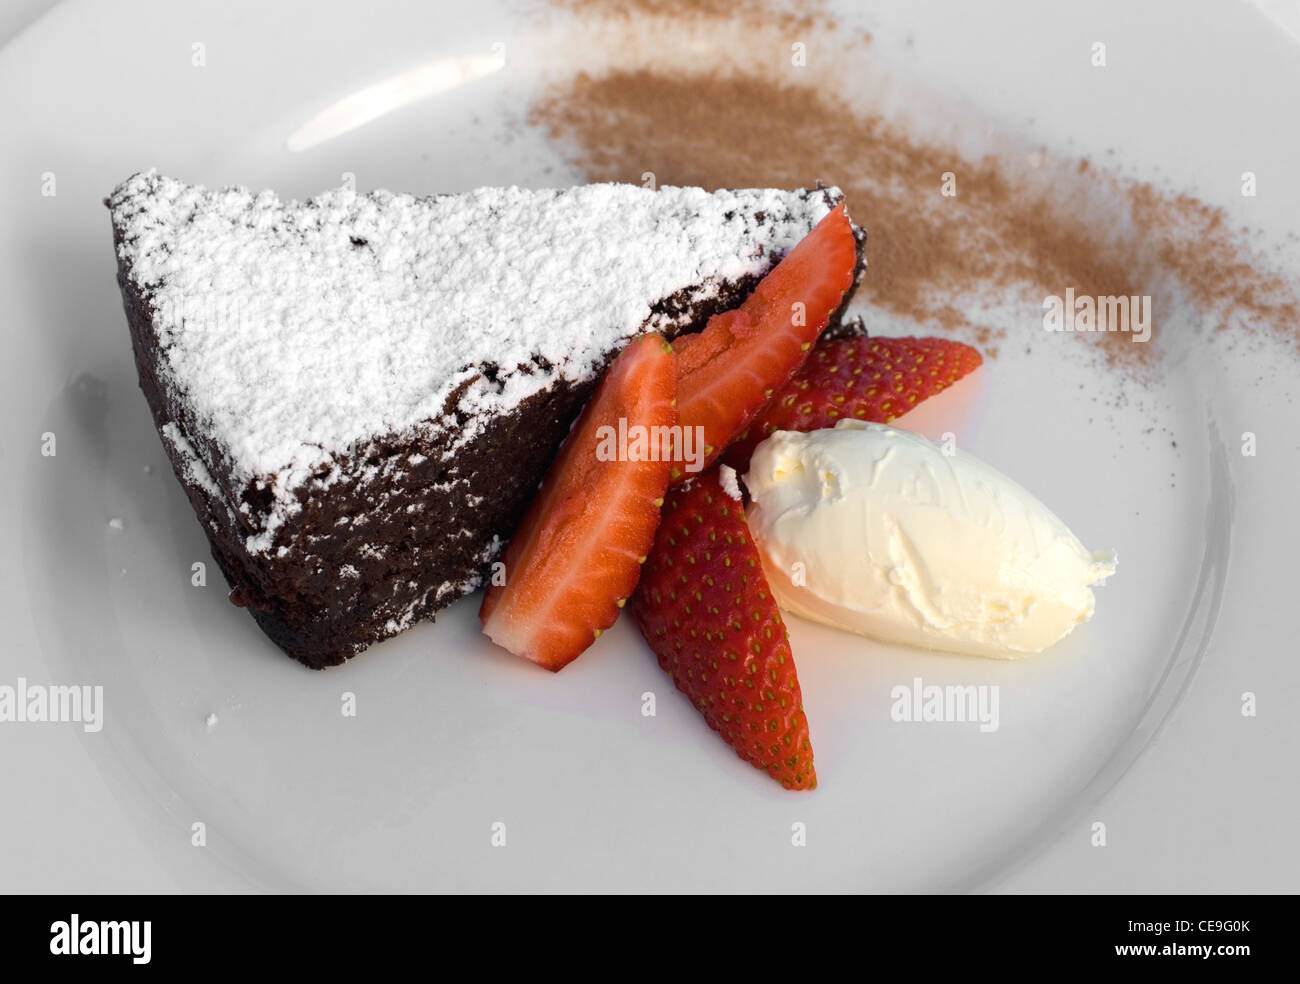 A Flourless Chocolate Tart, served with Strawberry Wedges and Creme Fraiche Stock Photo